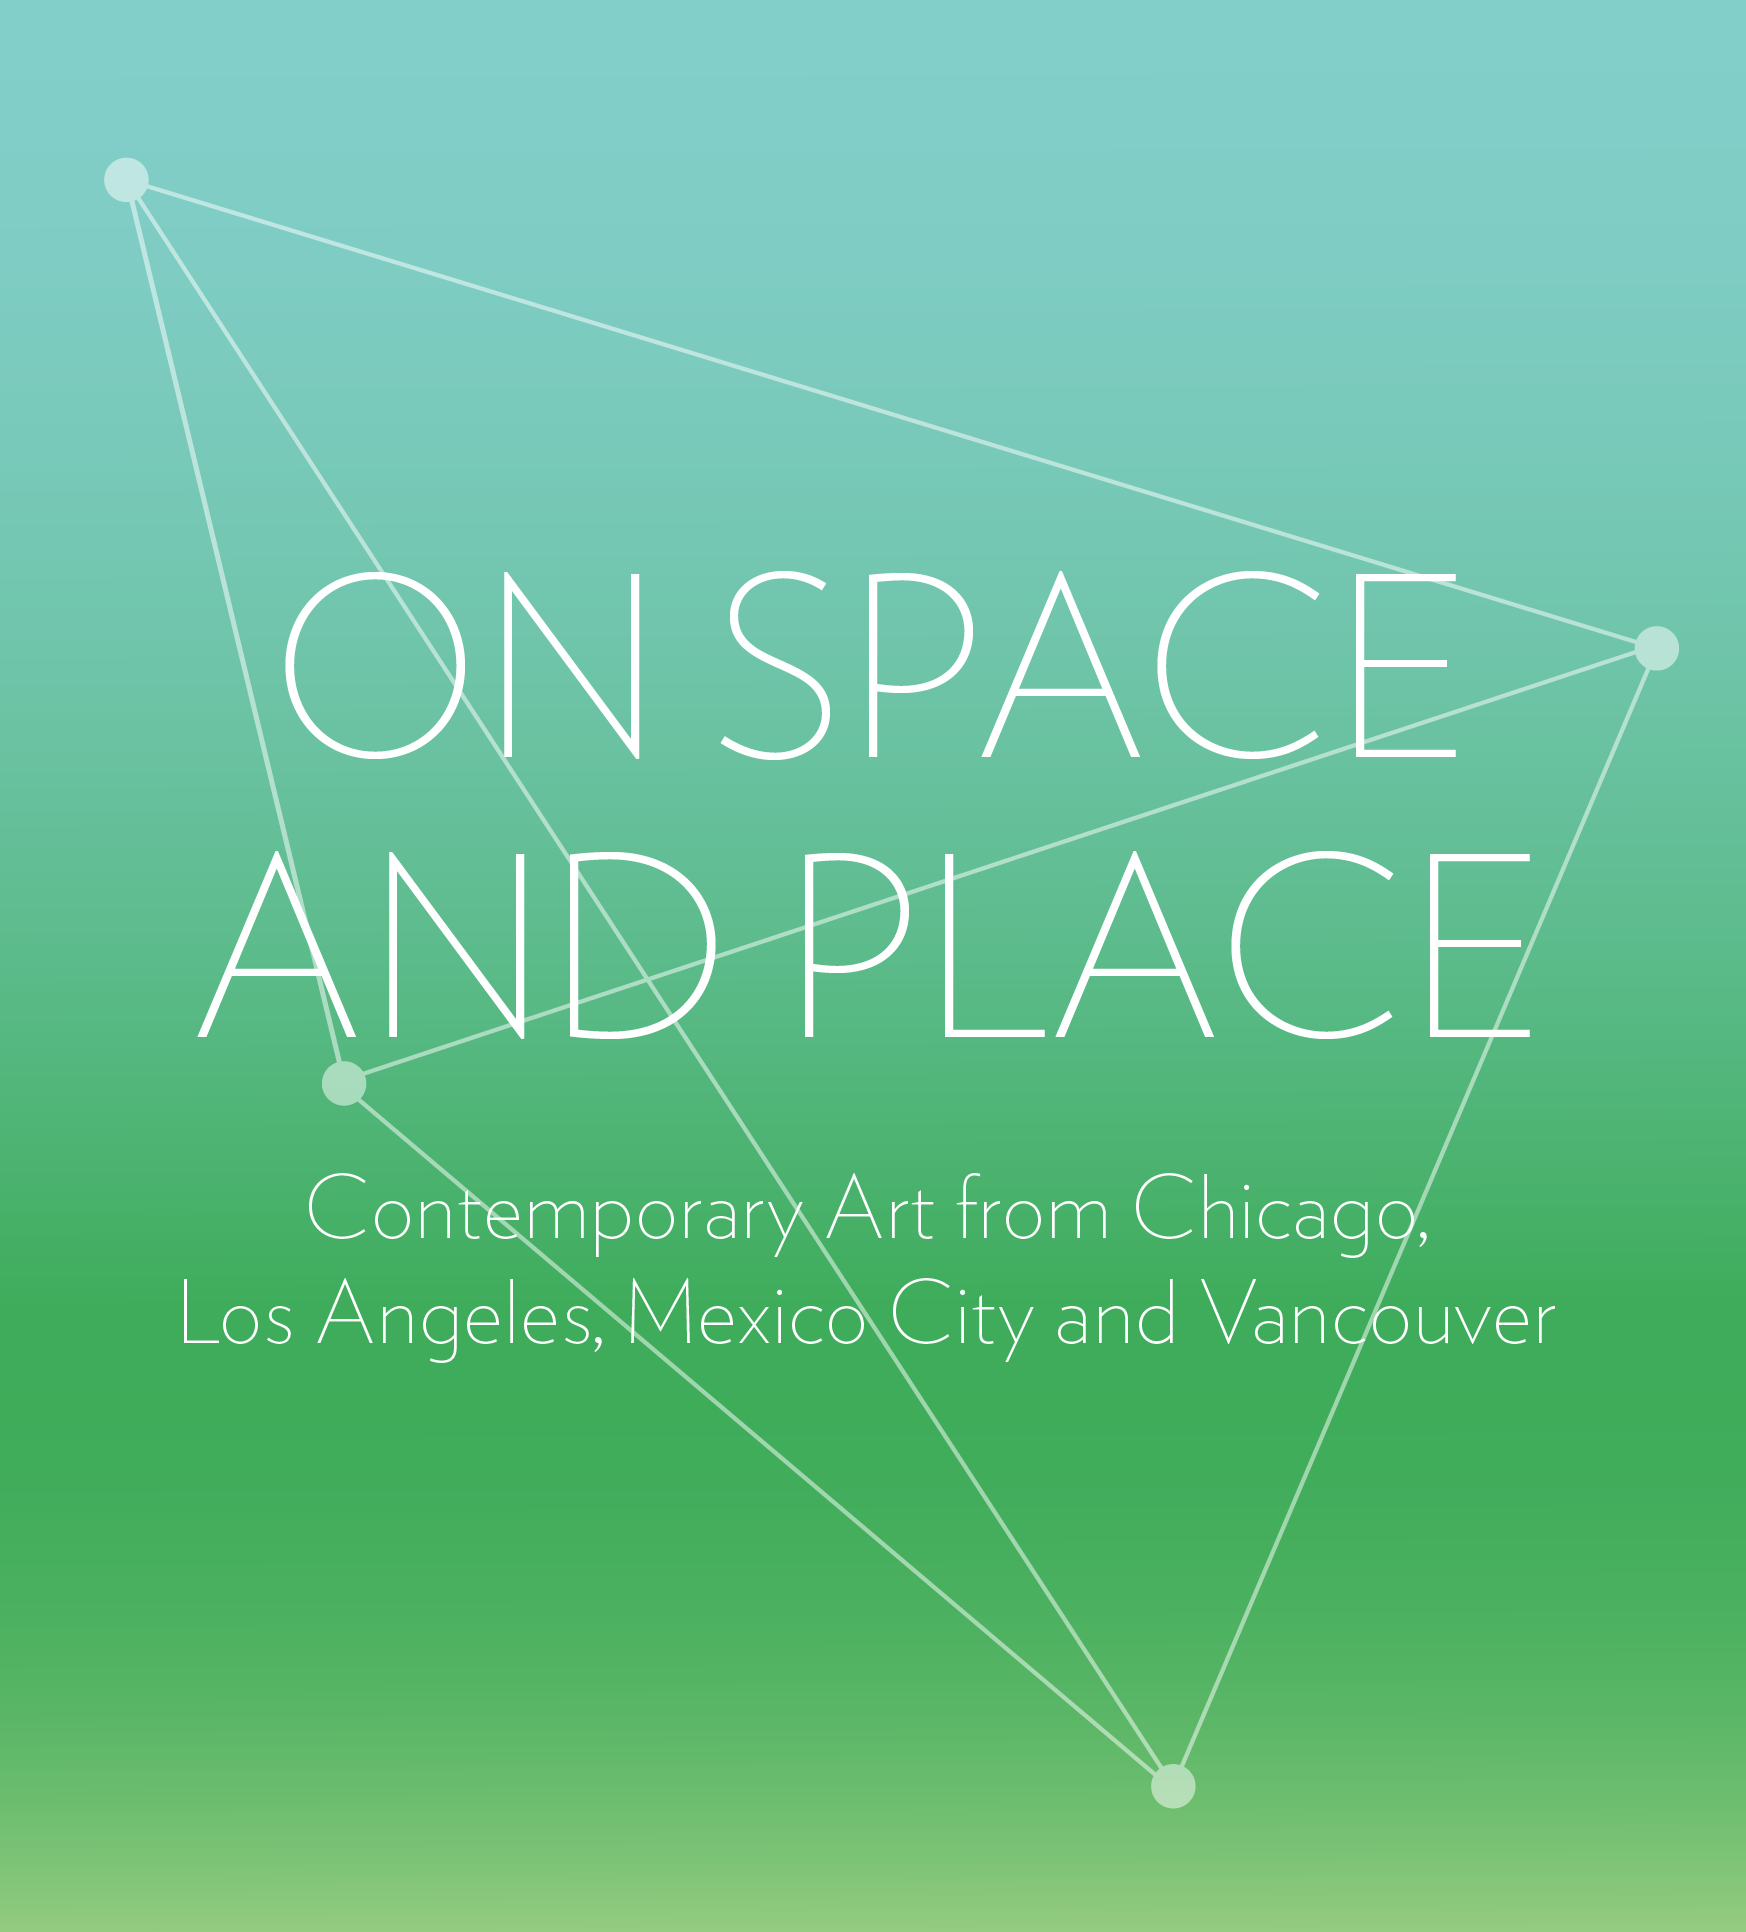 ART 21 on Space and Place